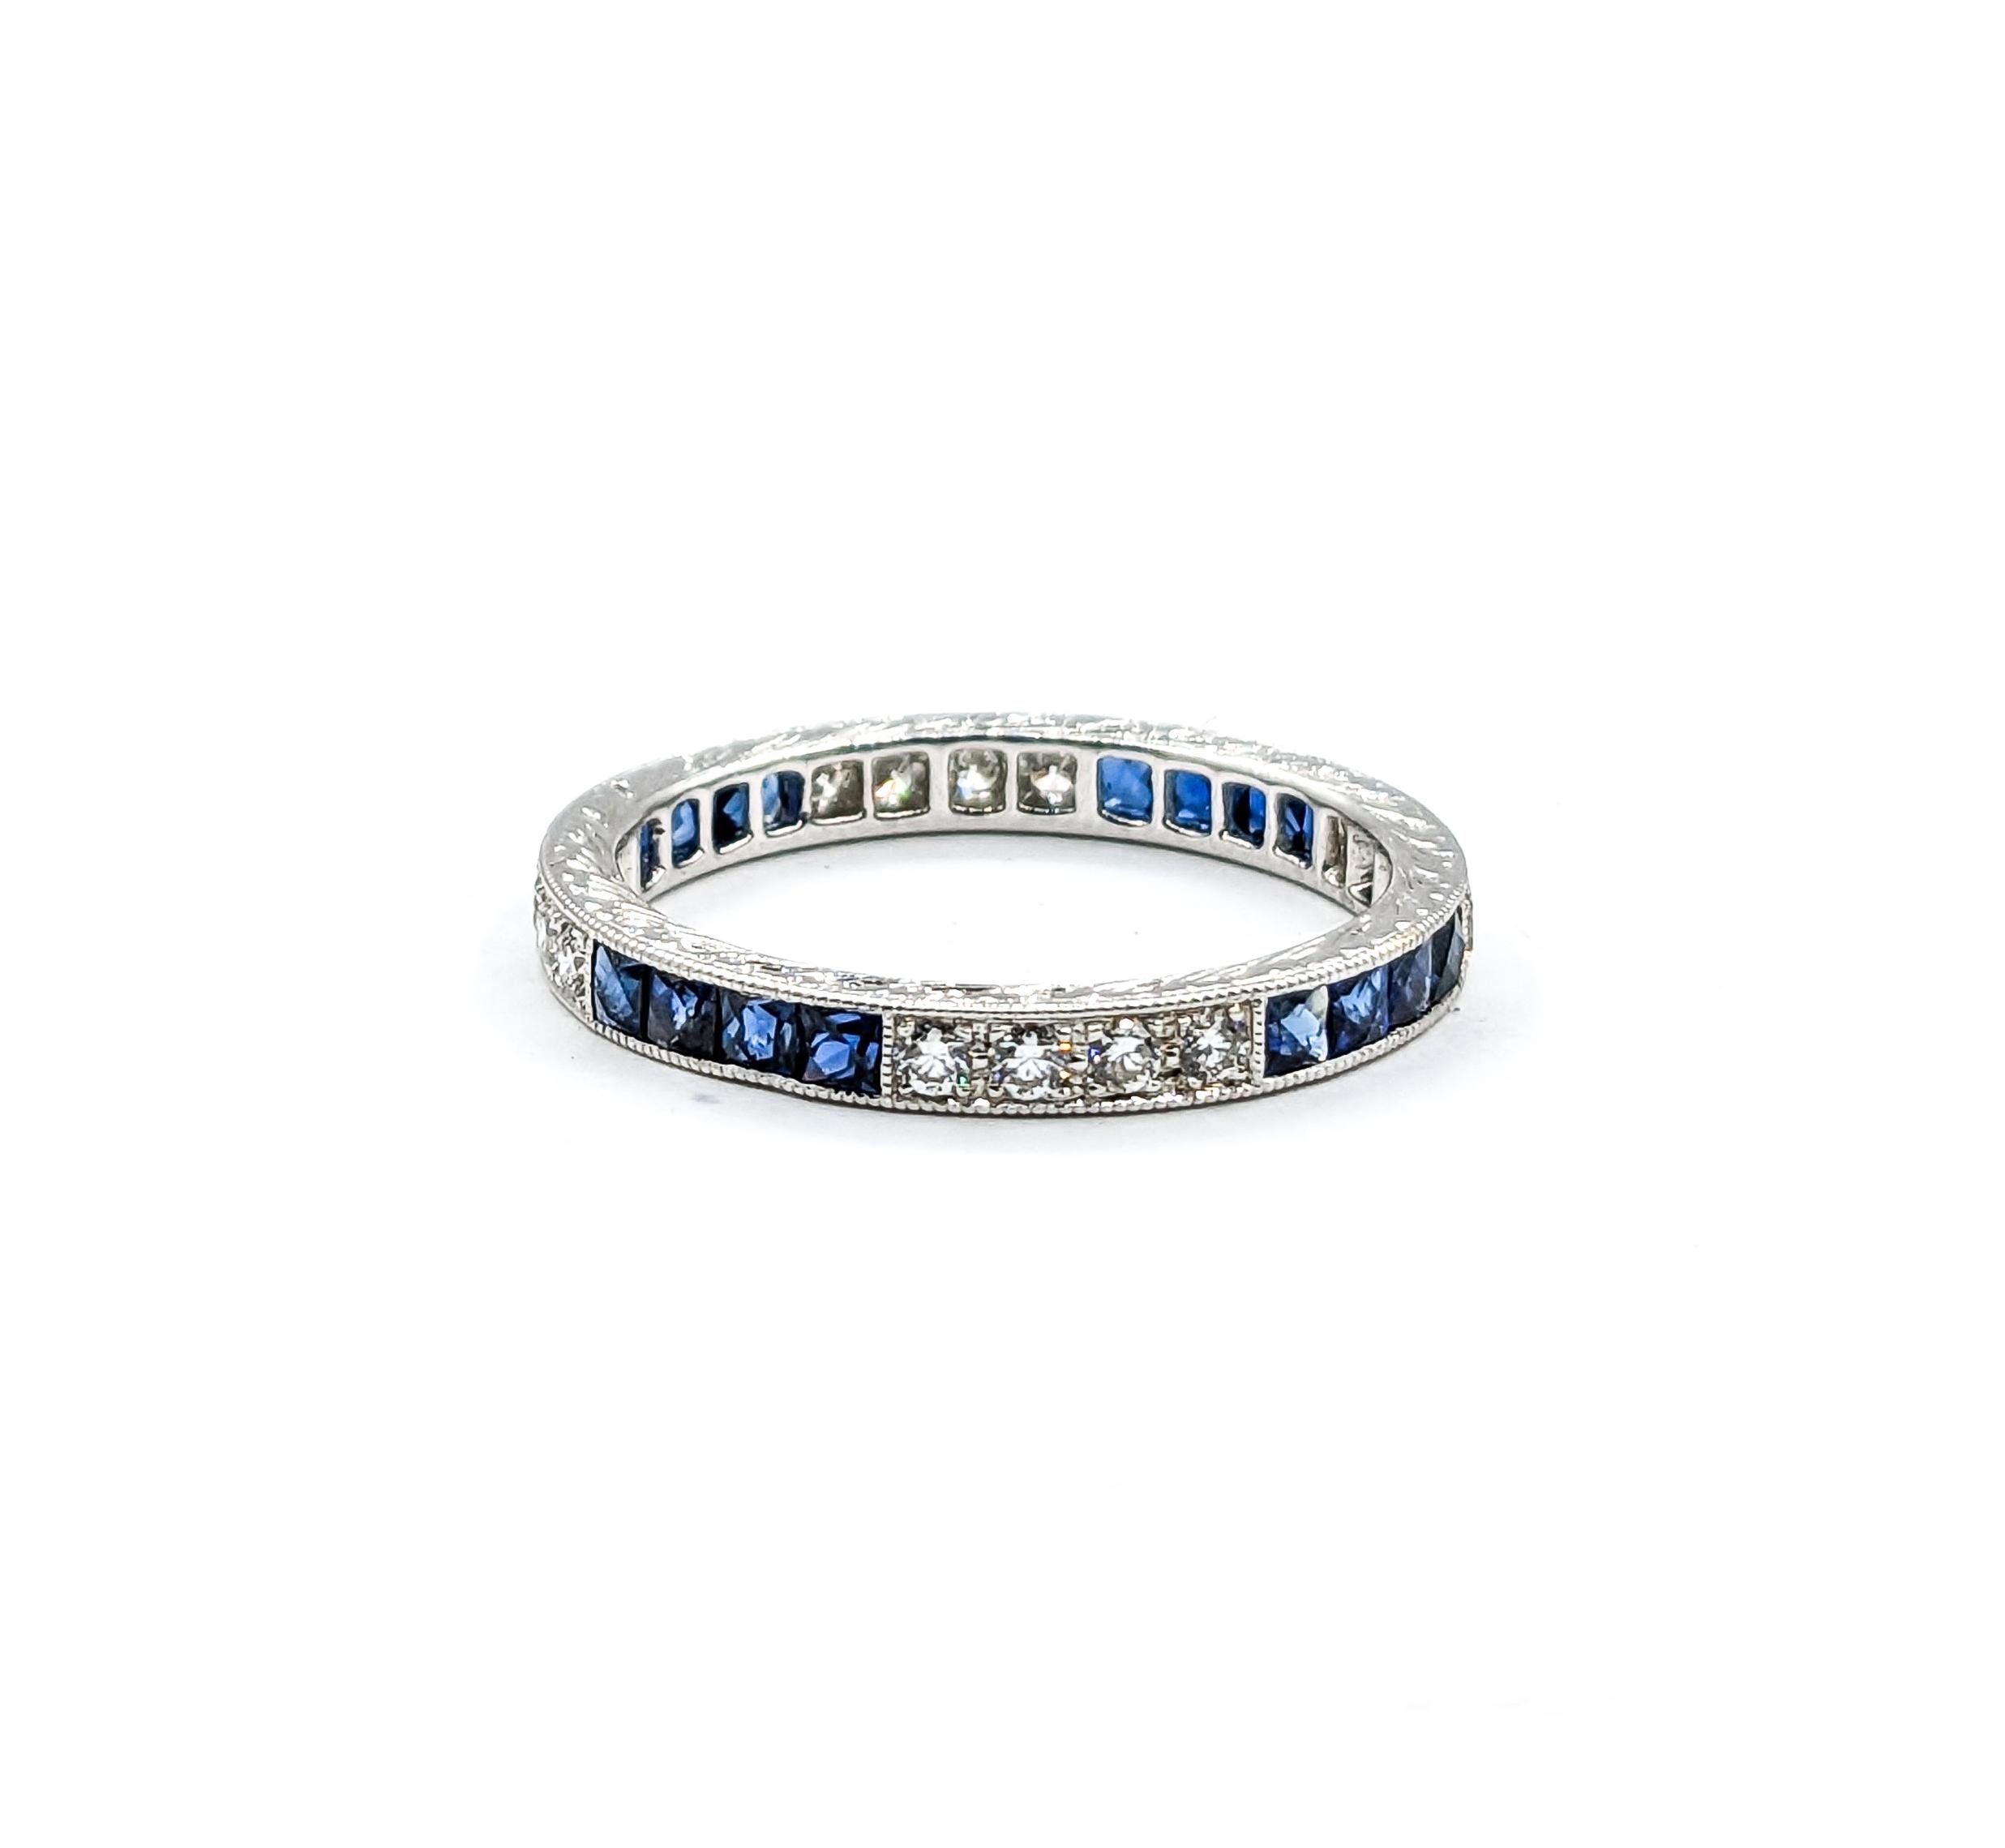 Eternity Sapphire & Diamond Ring 18k White Gold In Excellent Condition For Sale In Bloomington, MN